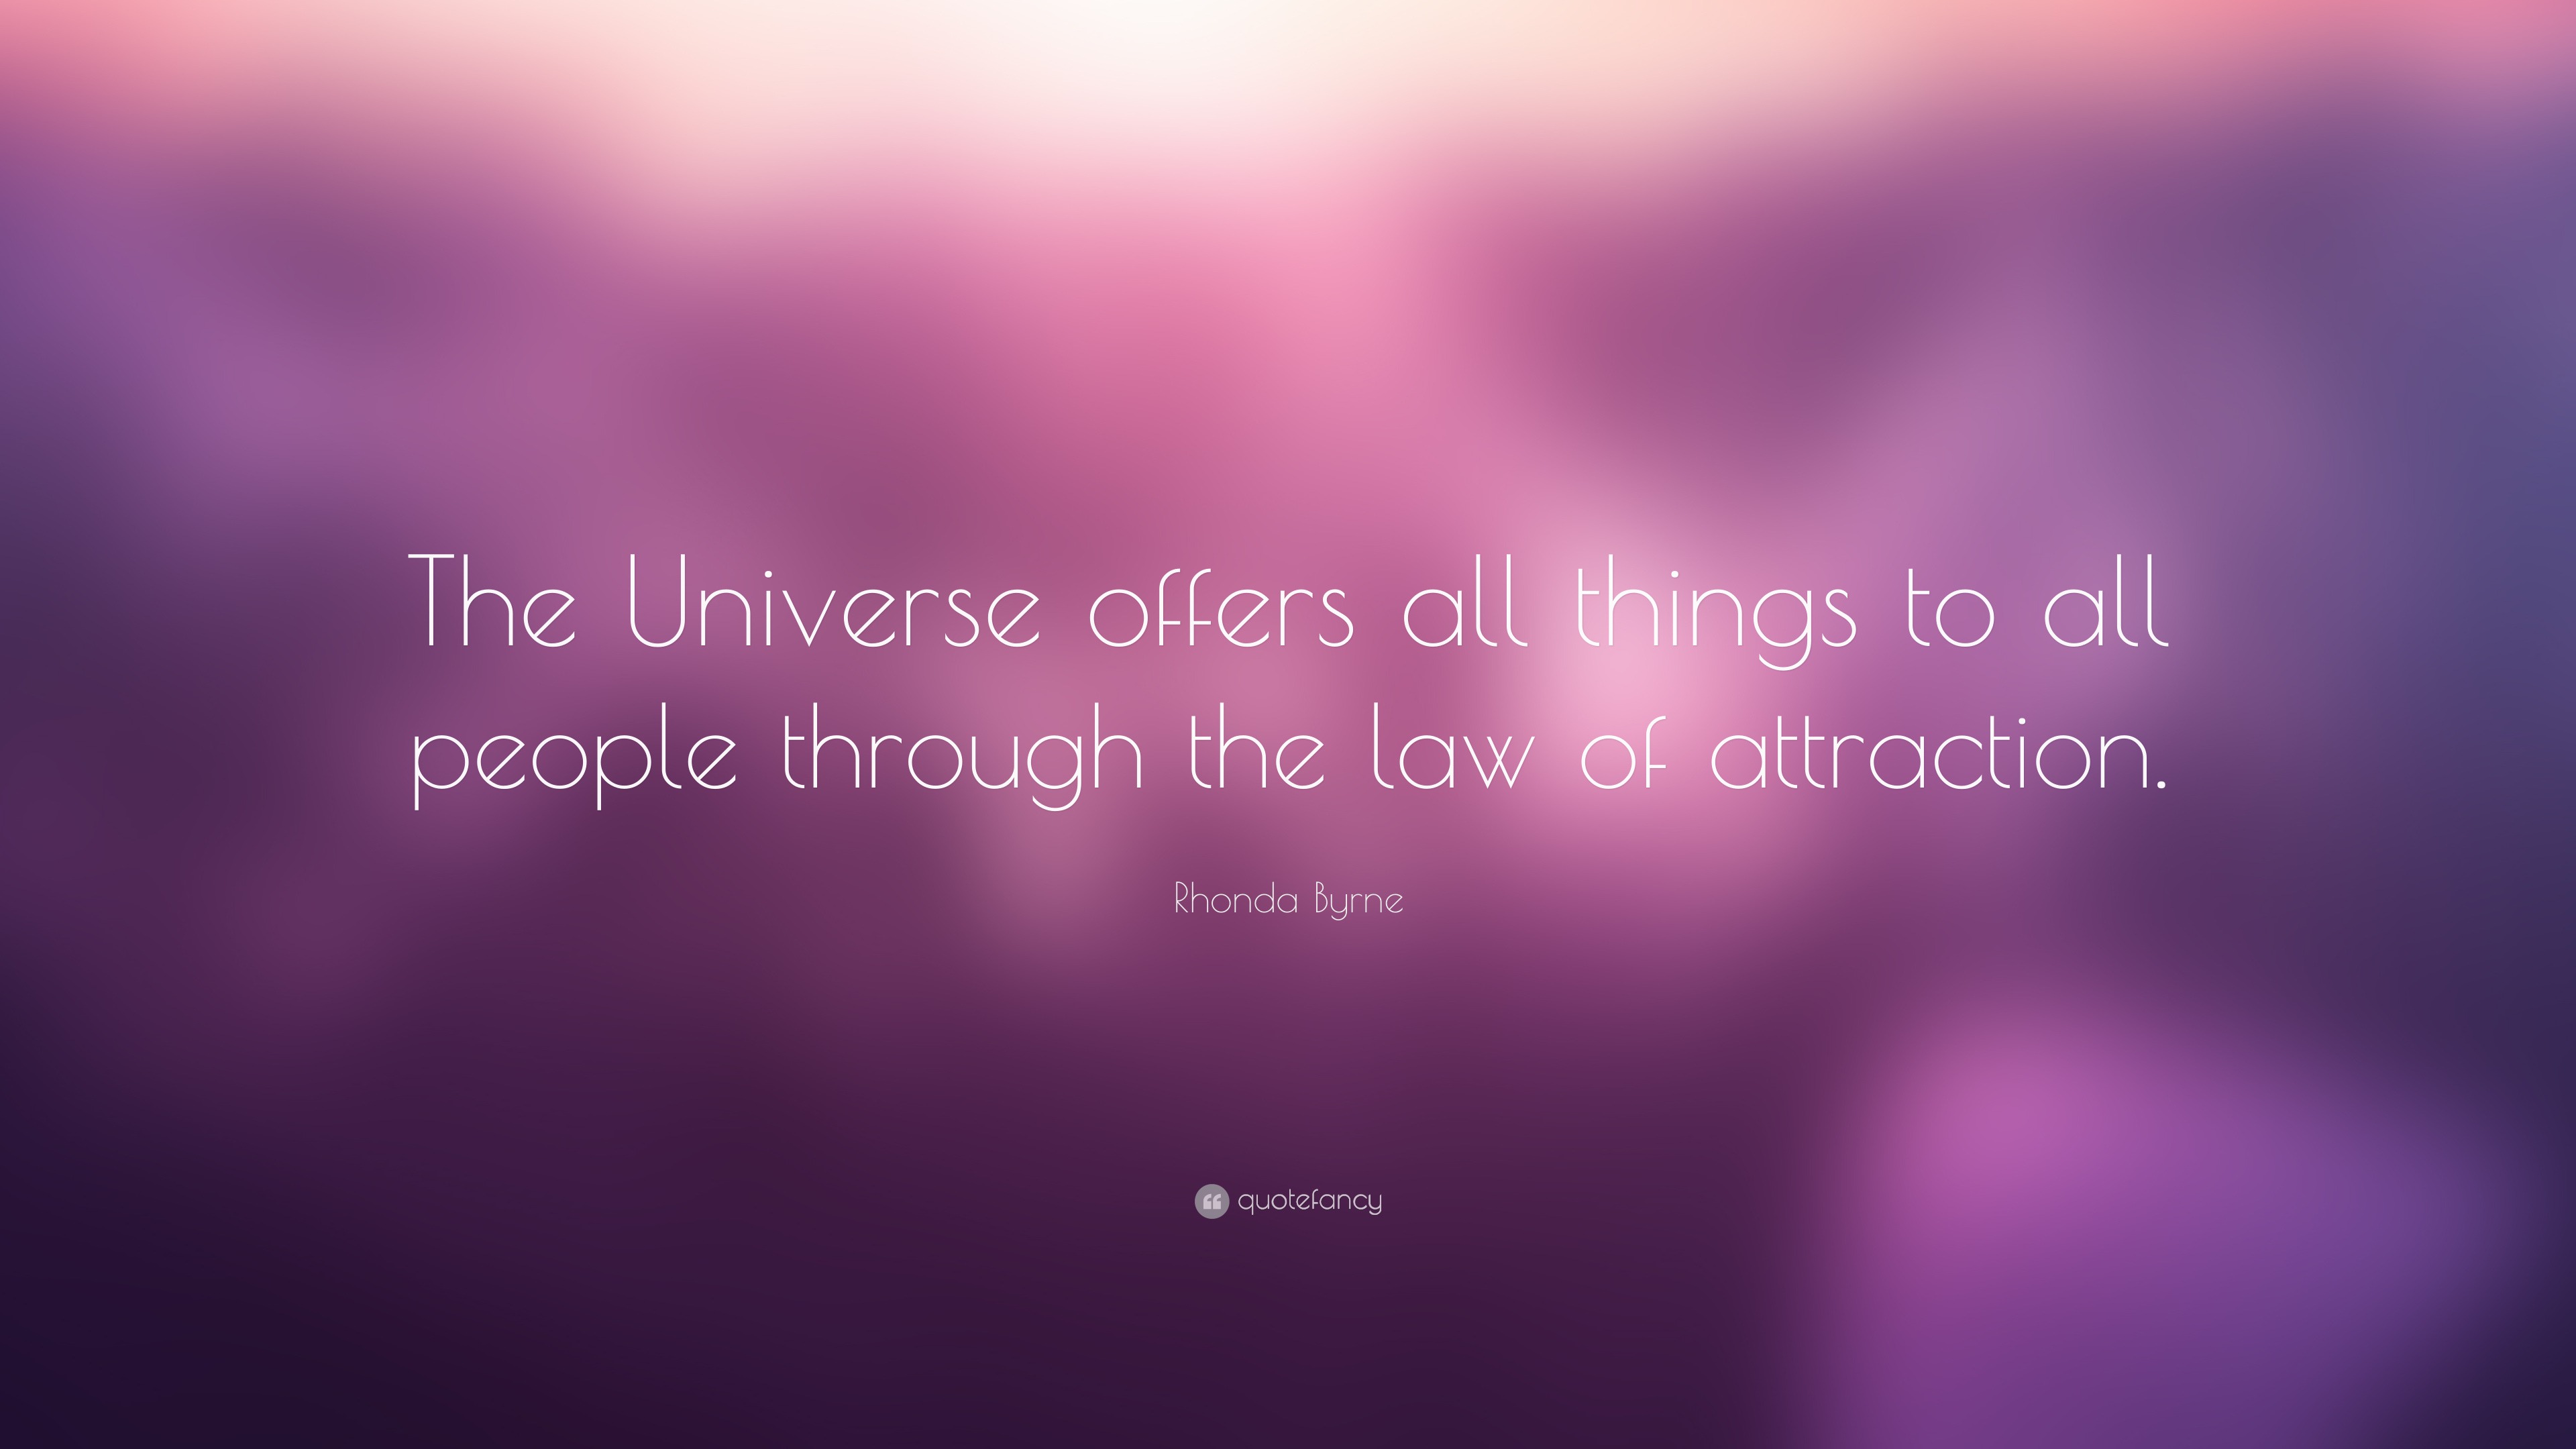 Rhonda Byrne Quote: “The Universe offers all things to all people ...